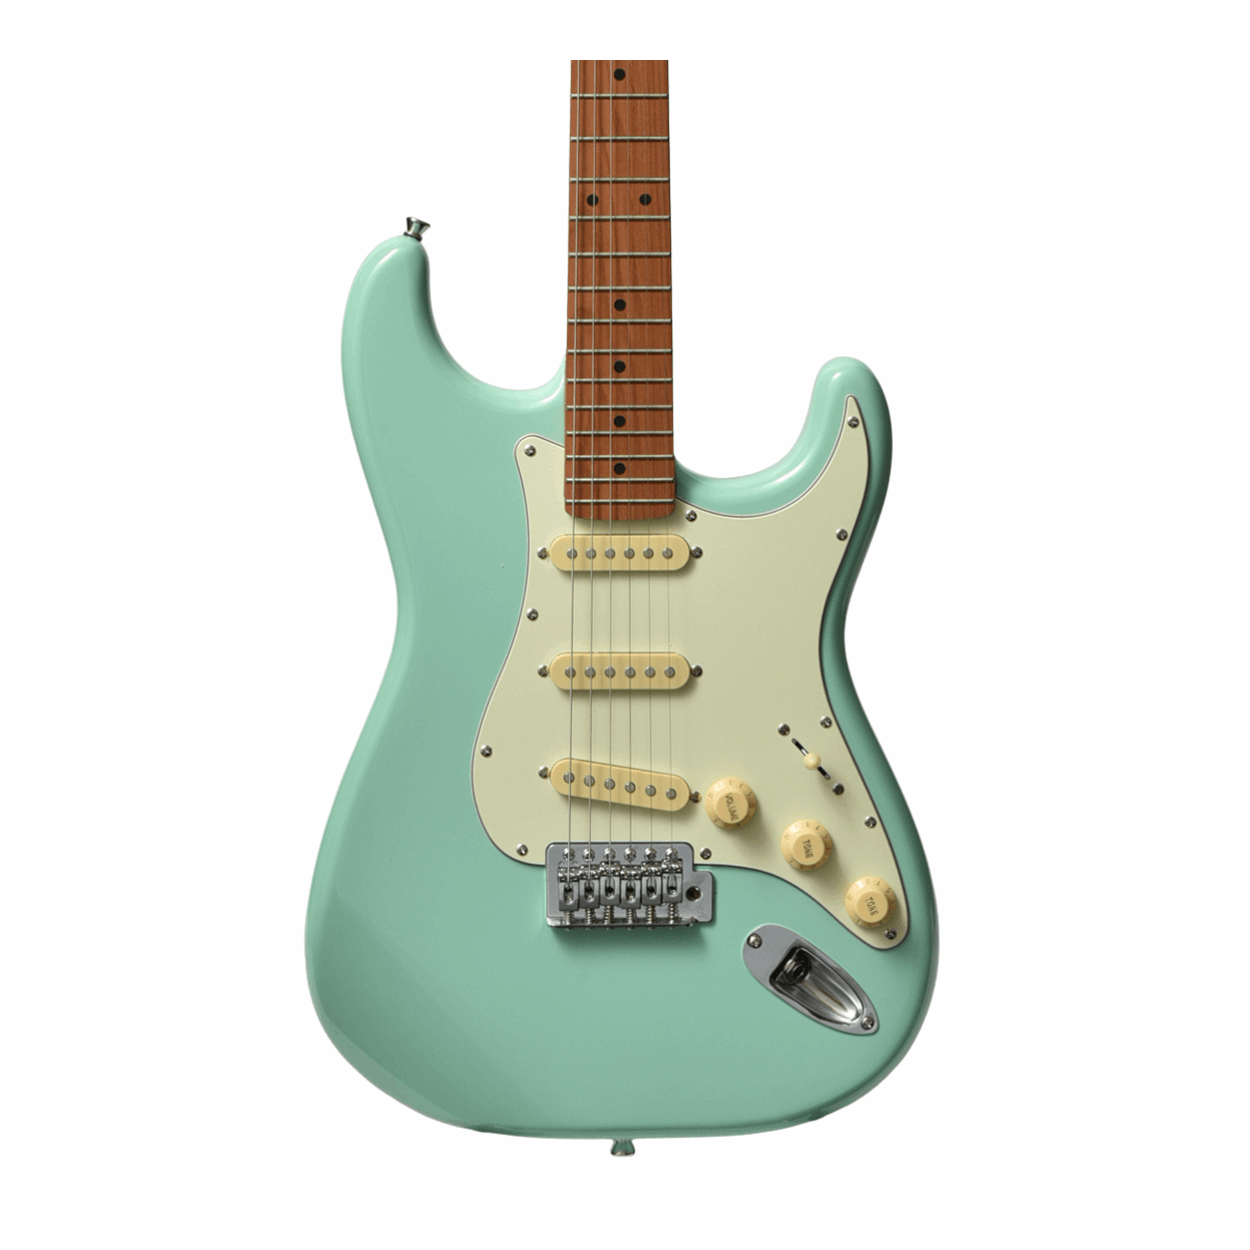 Bacchus Bst-1-rsm/m-sfg Universe Series Roasted Maple Electric Guitar, Sea Foam Green With Bag